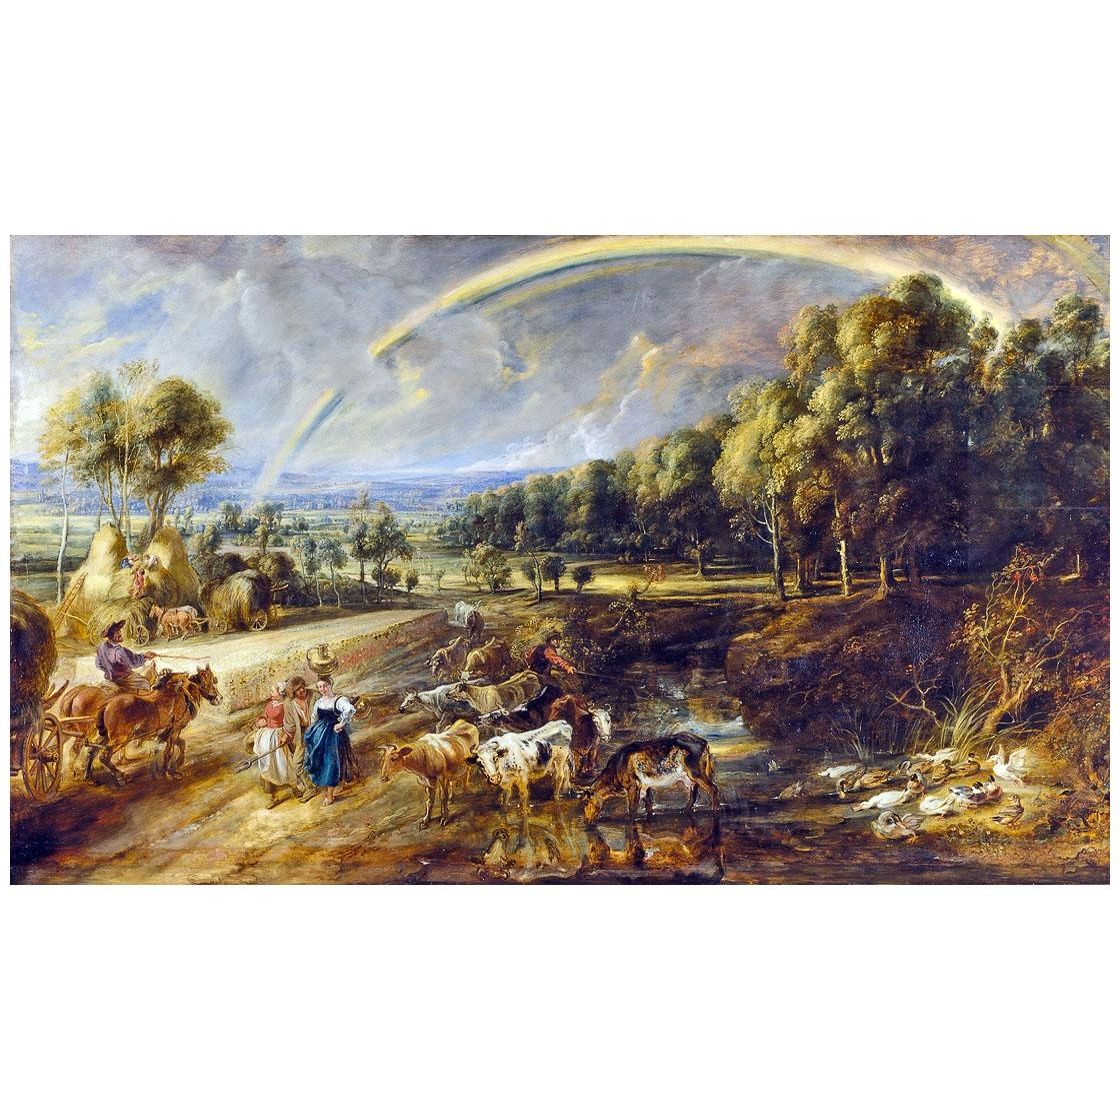 Peter Paul Rubens. Landscape with a Rainbow. 1636. Wallace Collection London